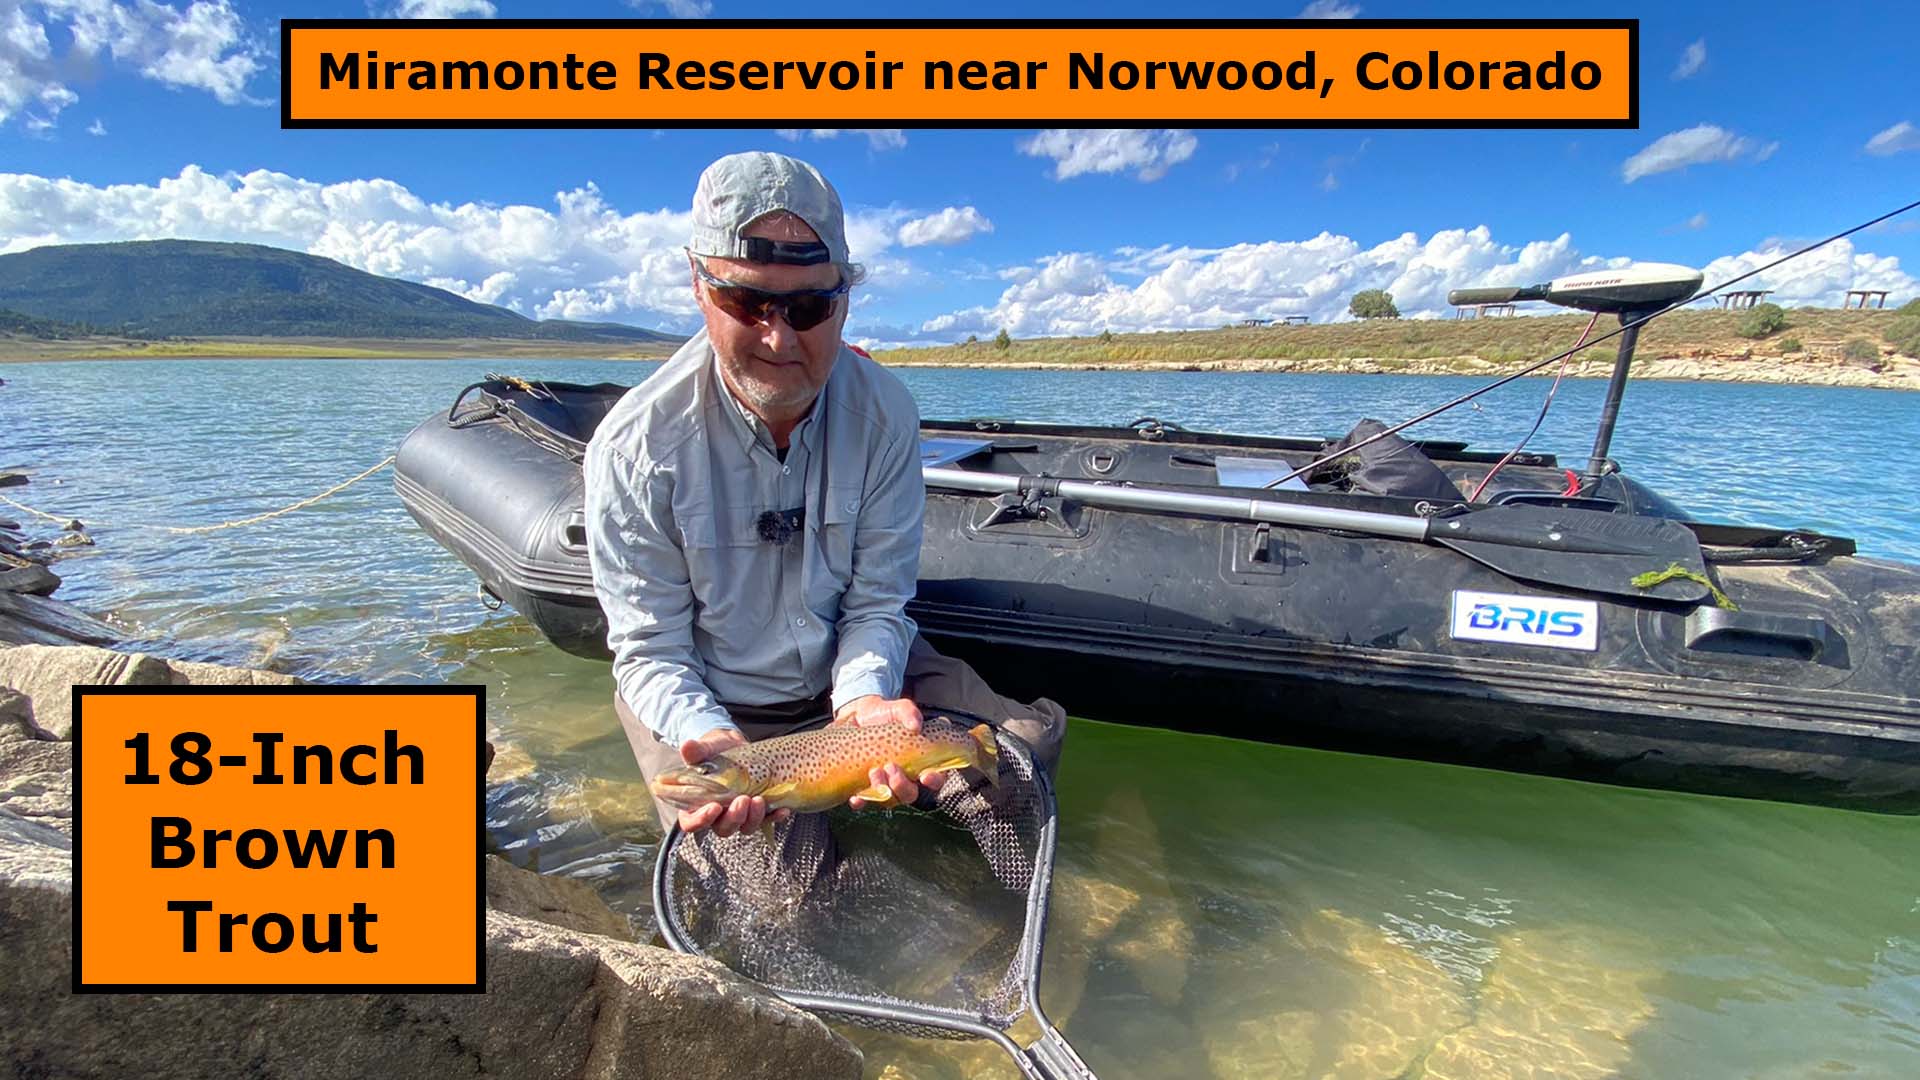 Brown Trout Caught in the Miramonte Reservoir